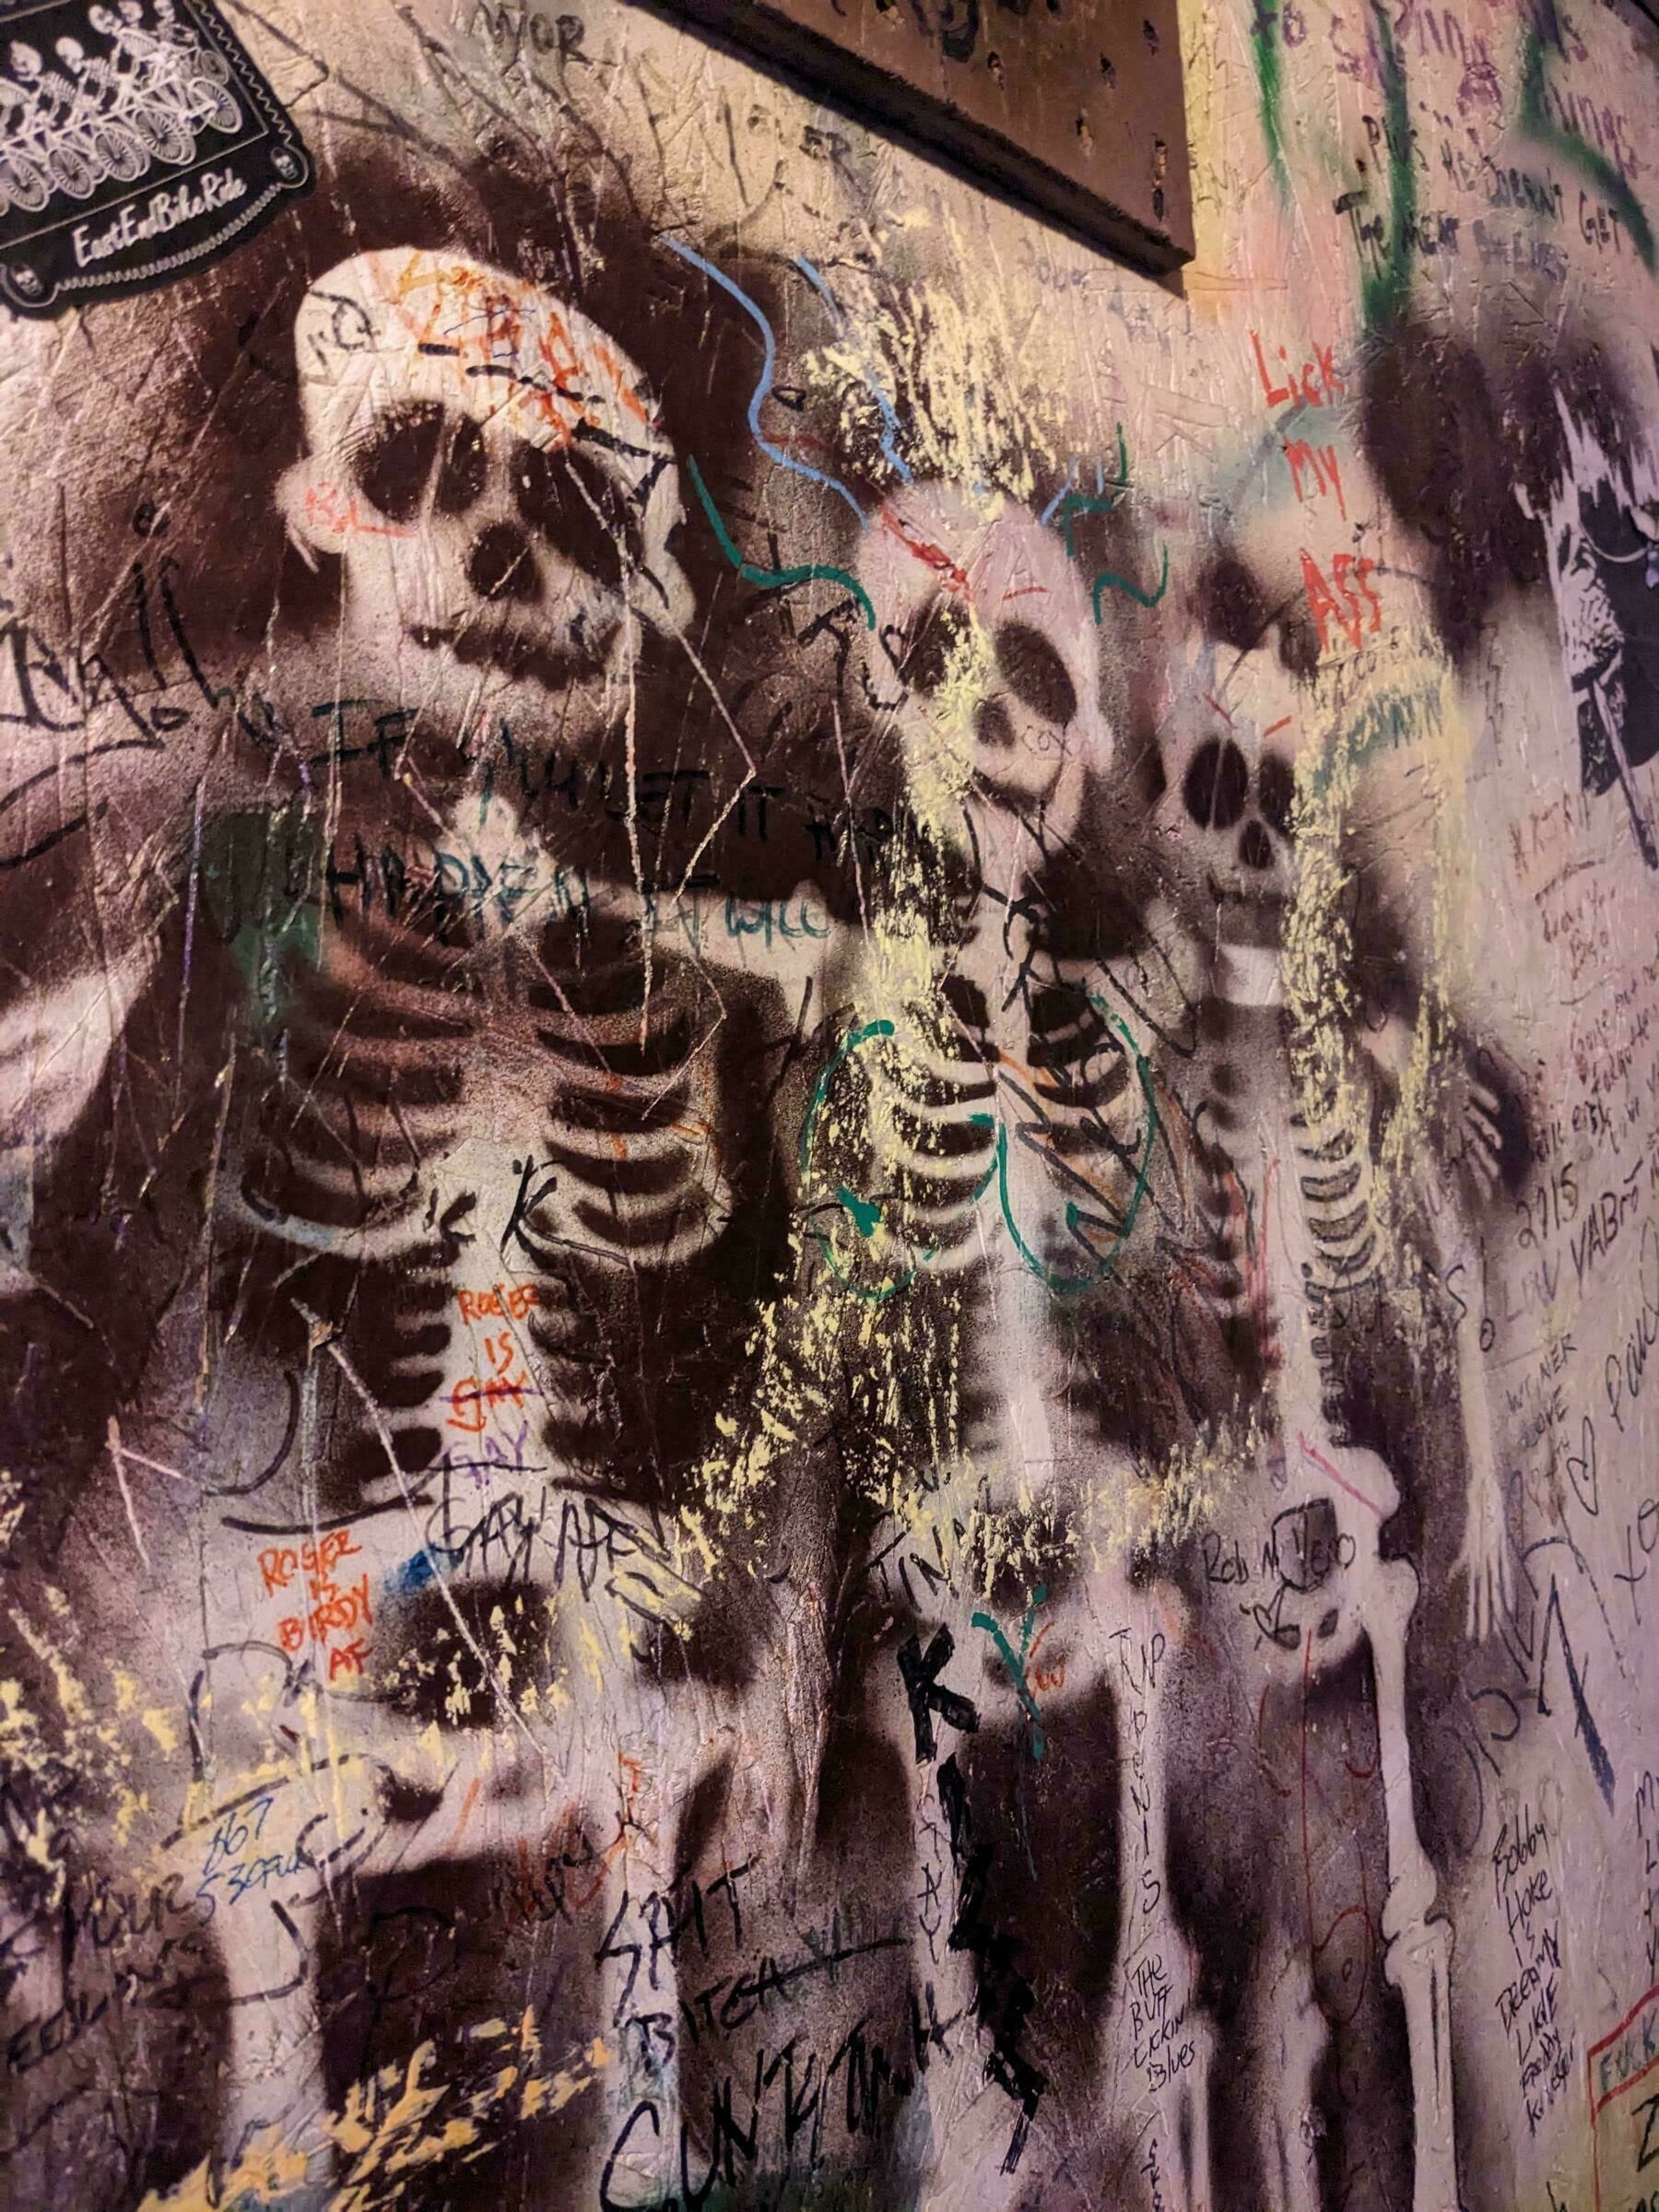 stenciled skeletons painted on a restroom wall